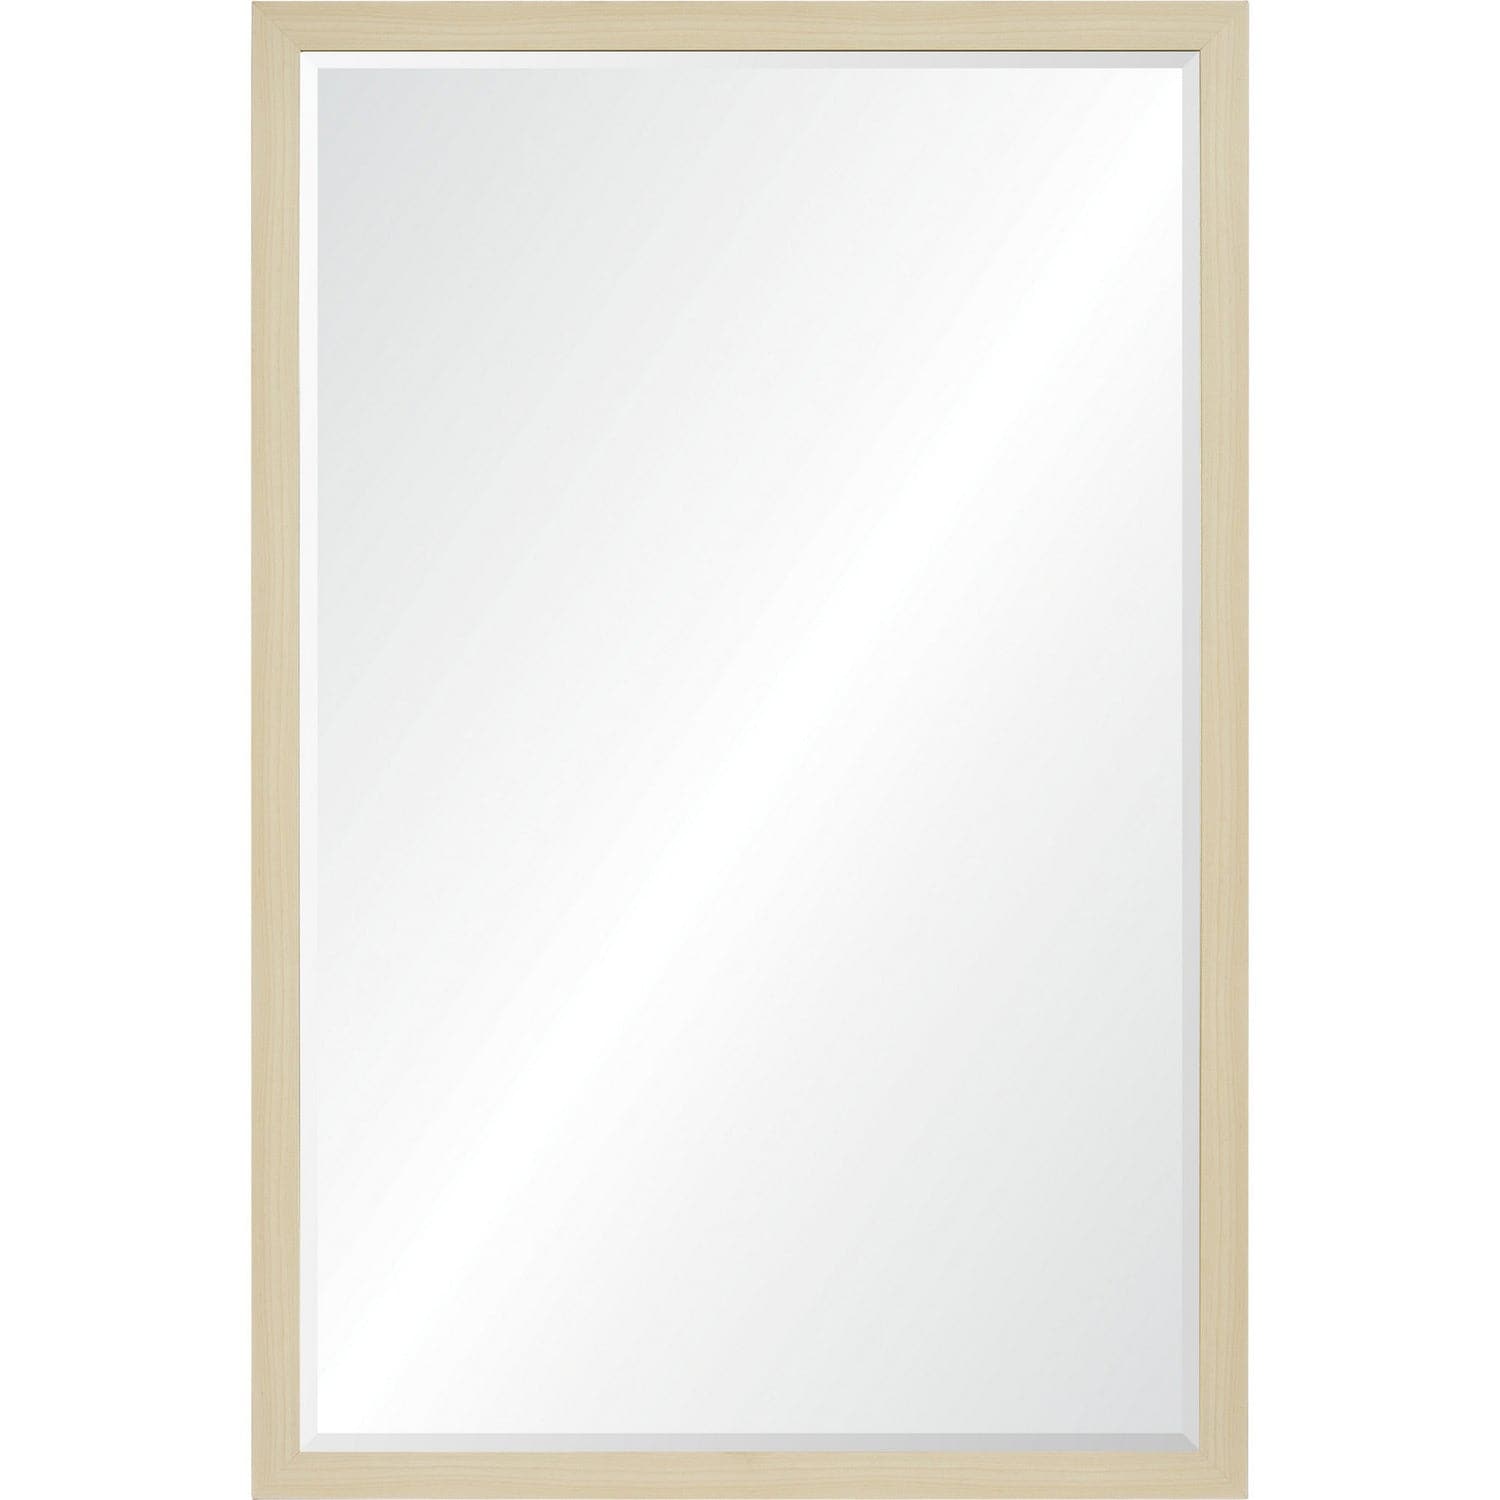 Renwil - MT2560 - Mirror - Armelle - Light Natural With Wood Grain